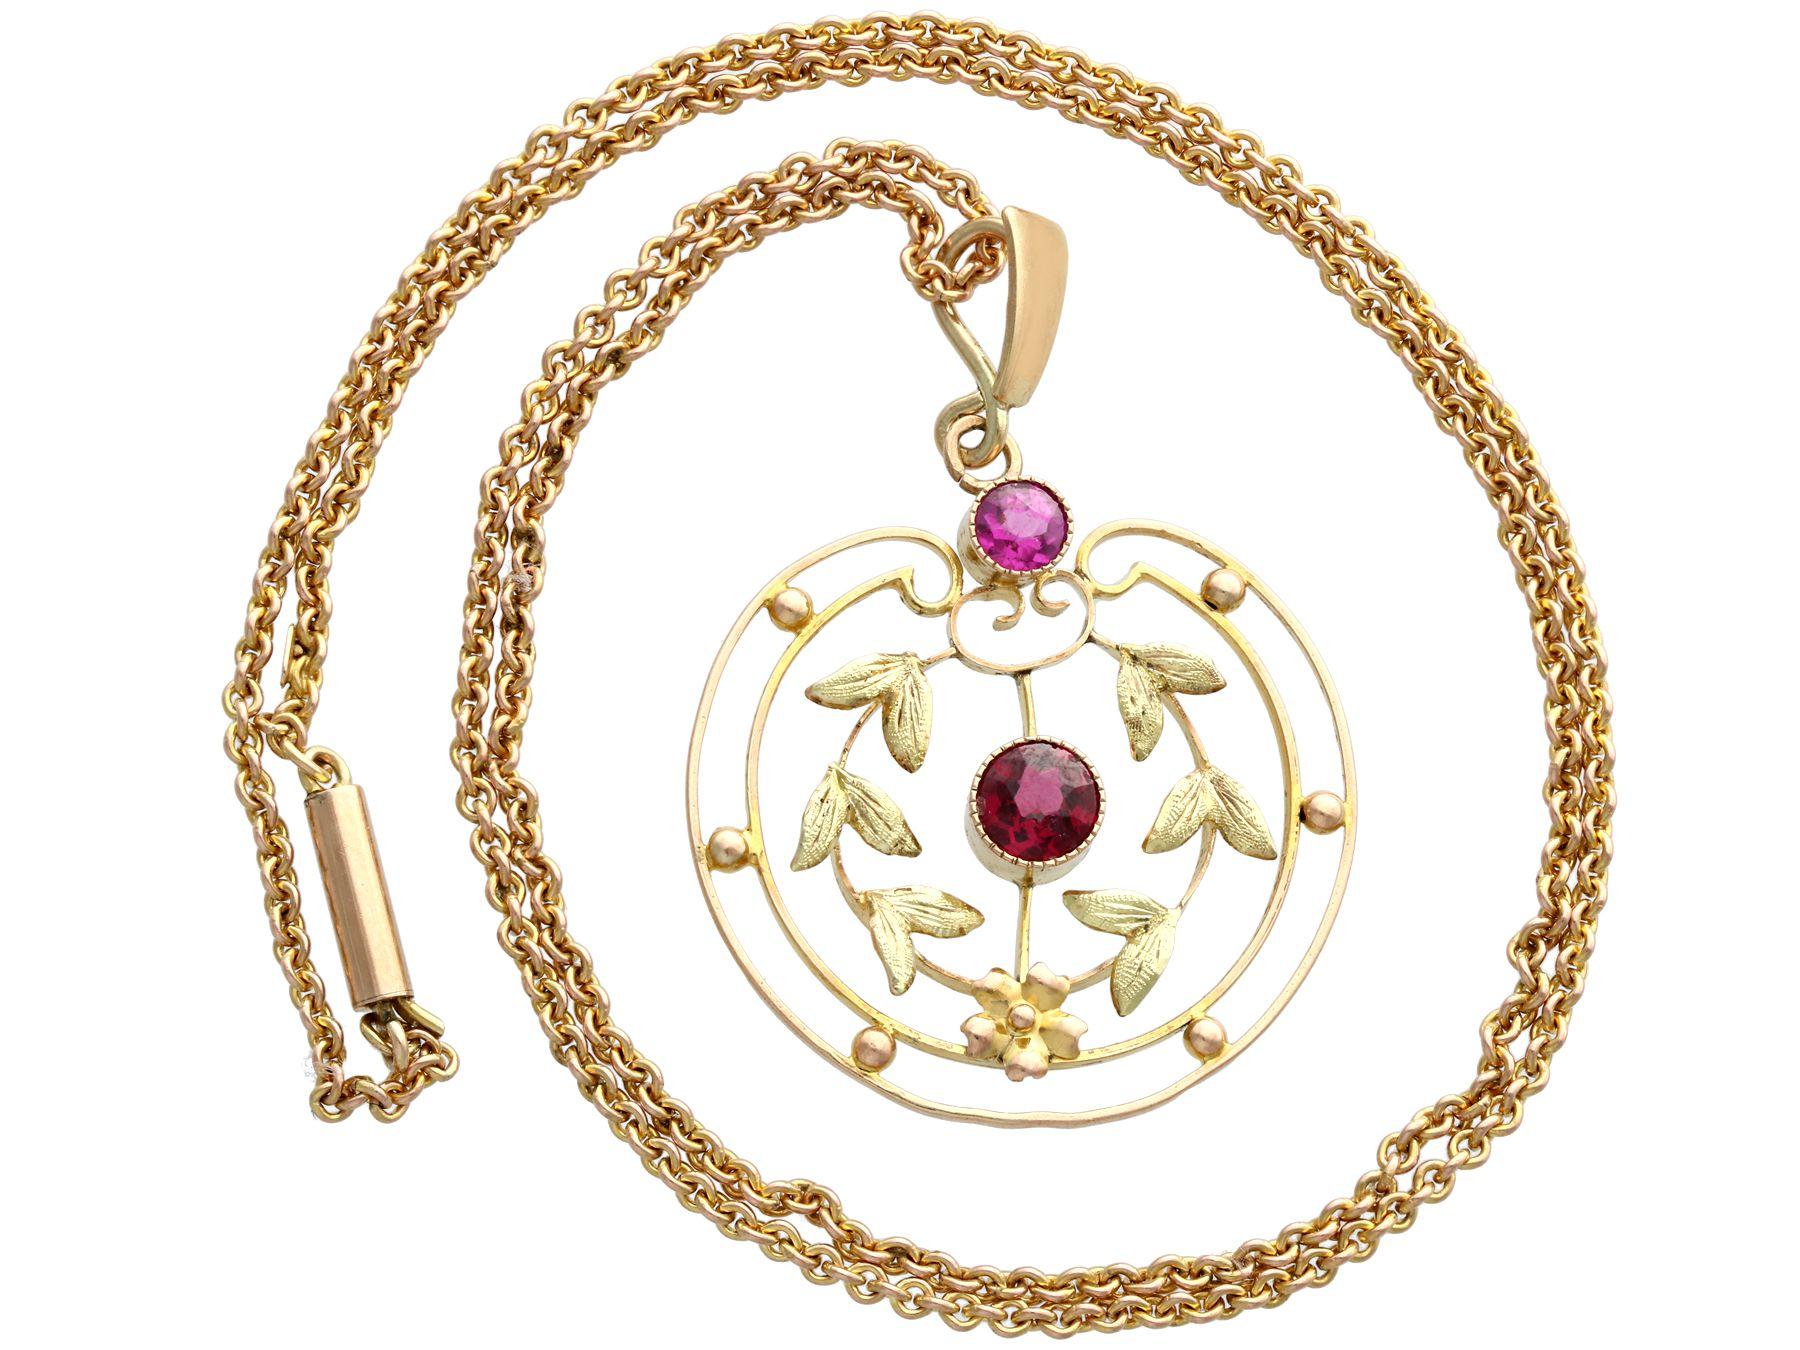 An impressive antique 0.48 carat amethyst and garnet, 9 karat yellow gold pendant; part of our diverse gemstone jewelry collections.

This fine and impressive amethyst and garnet pendant has been crafted in 9k yellow gold.

The pierced decorated,